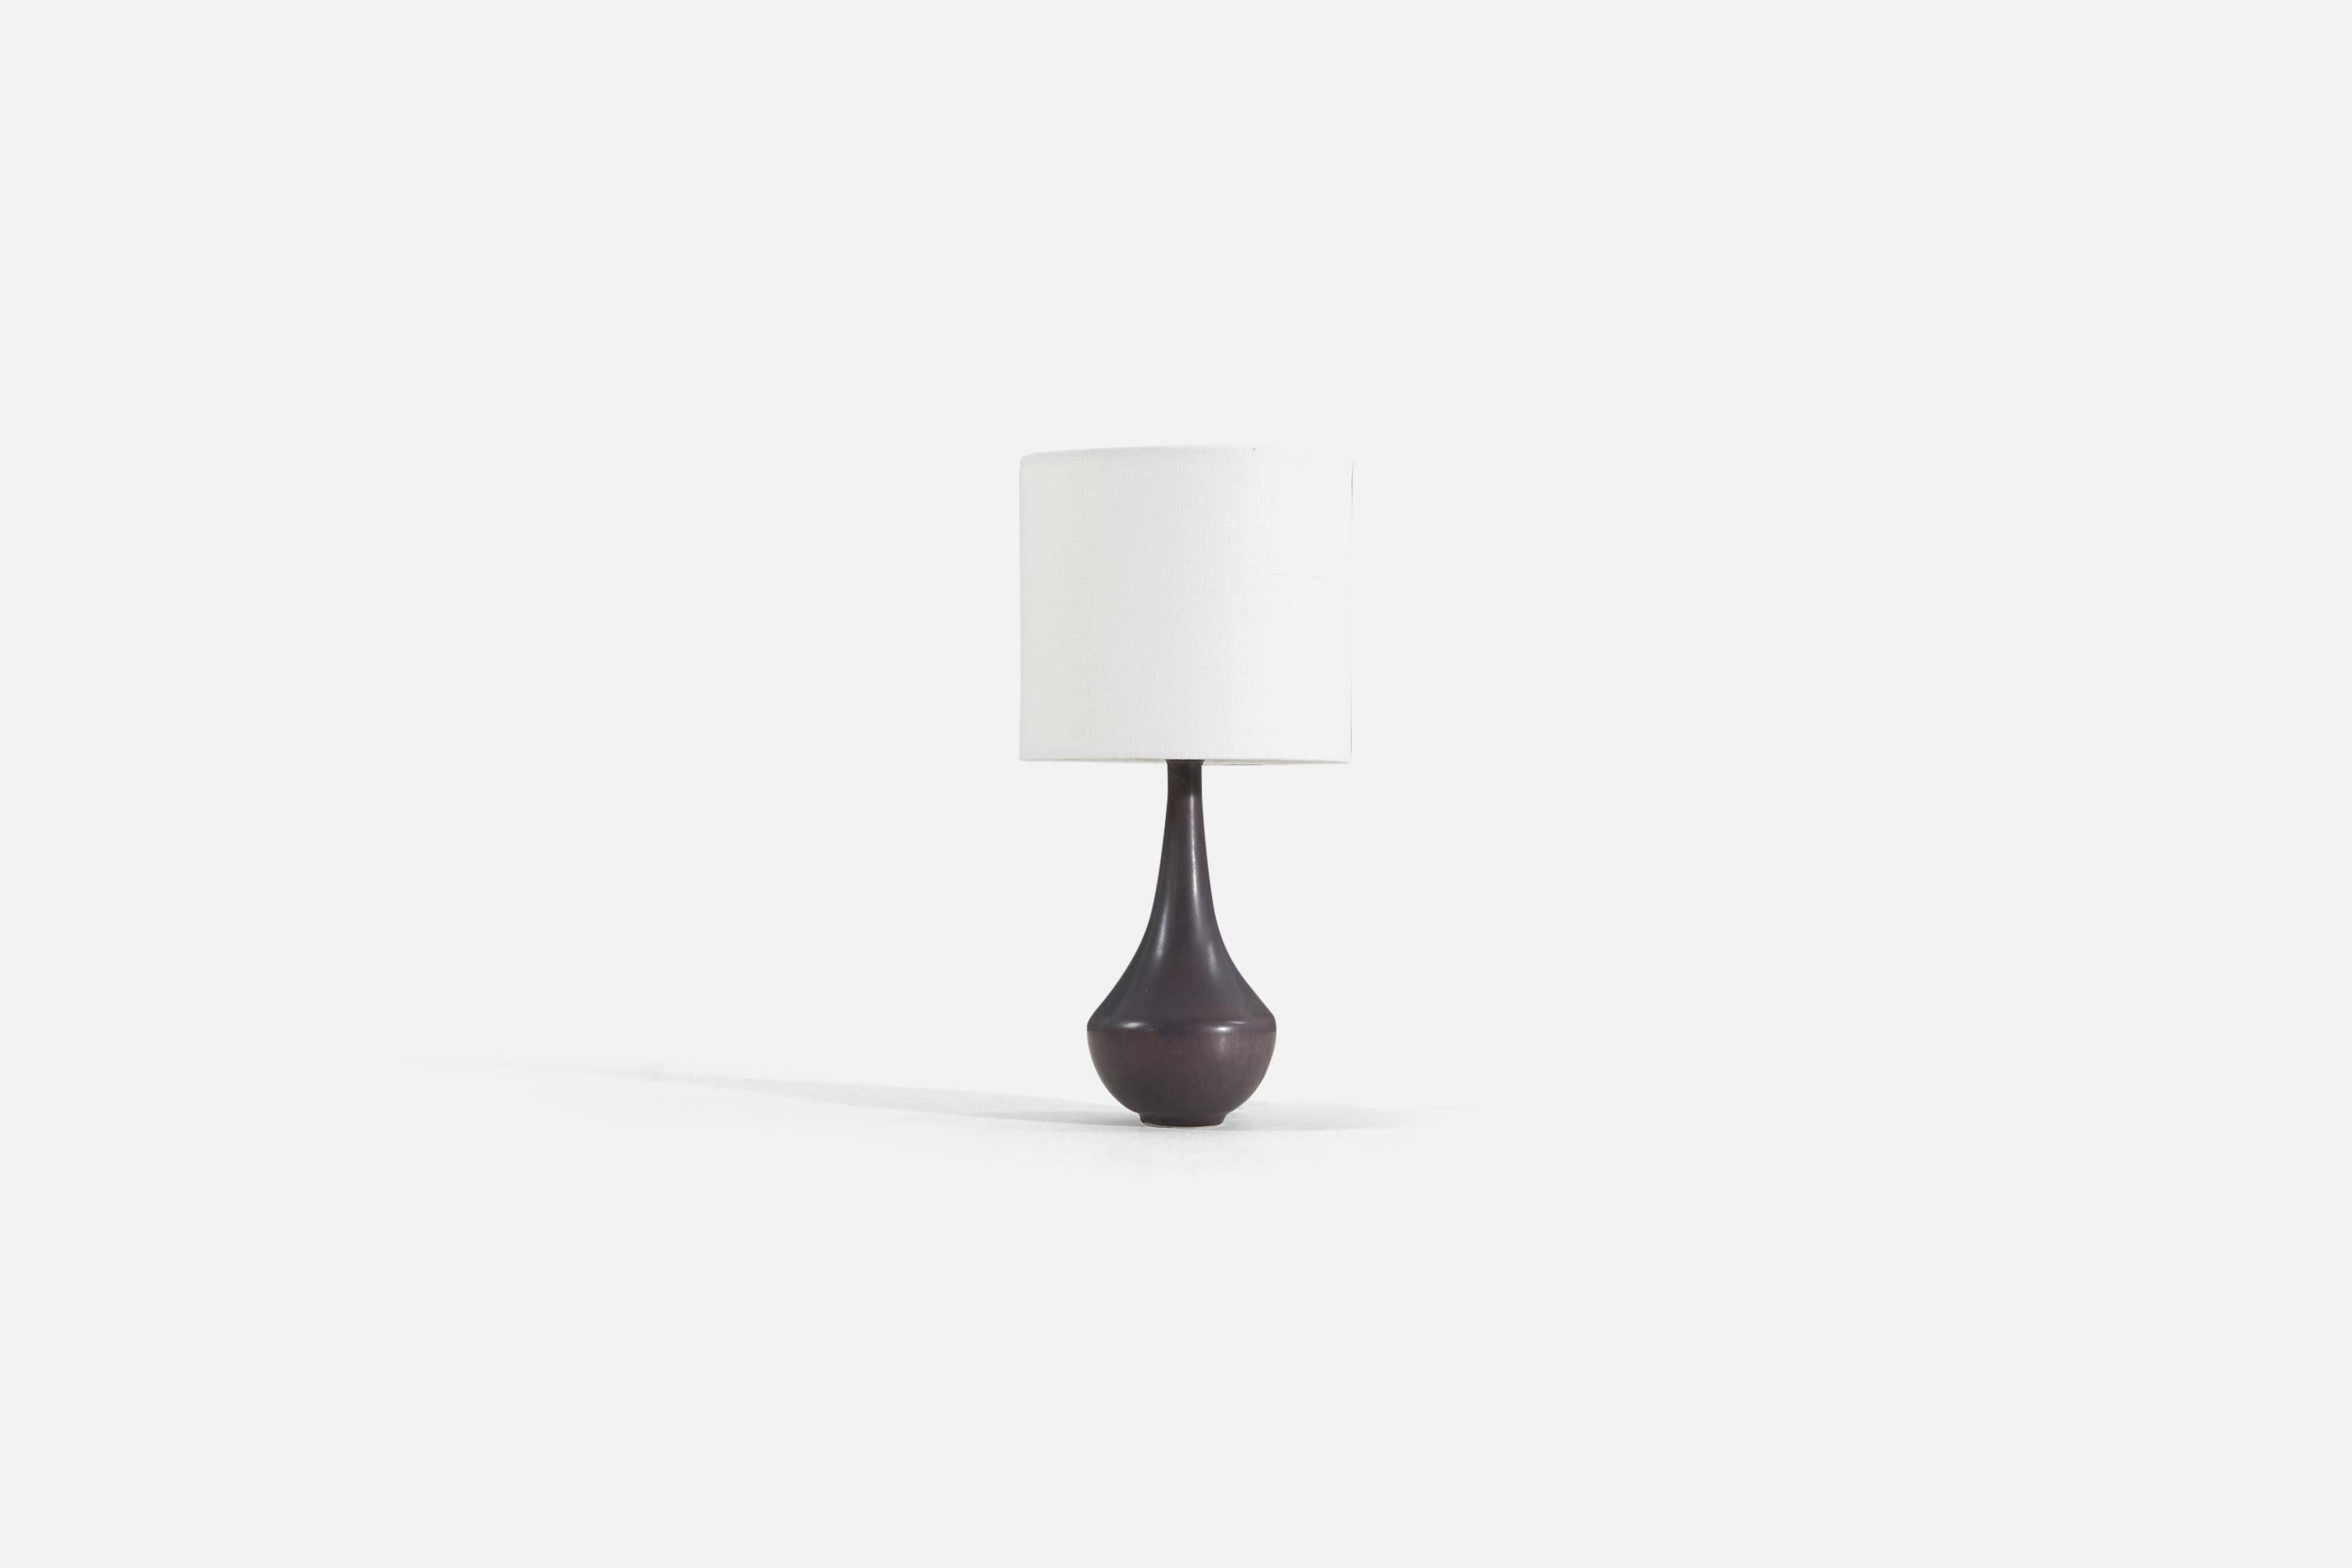 A table lamp produced by Rörstrand, Sweden, 1950s. Designed by Gunnar Nylund, (Swedish, 1914-1997). Signed on base. 

Sold without lampshade. Stated dimensions exclude lampshade, height includes socket.

For reference:

Shade : 6 x 6 x